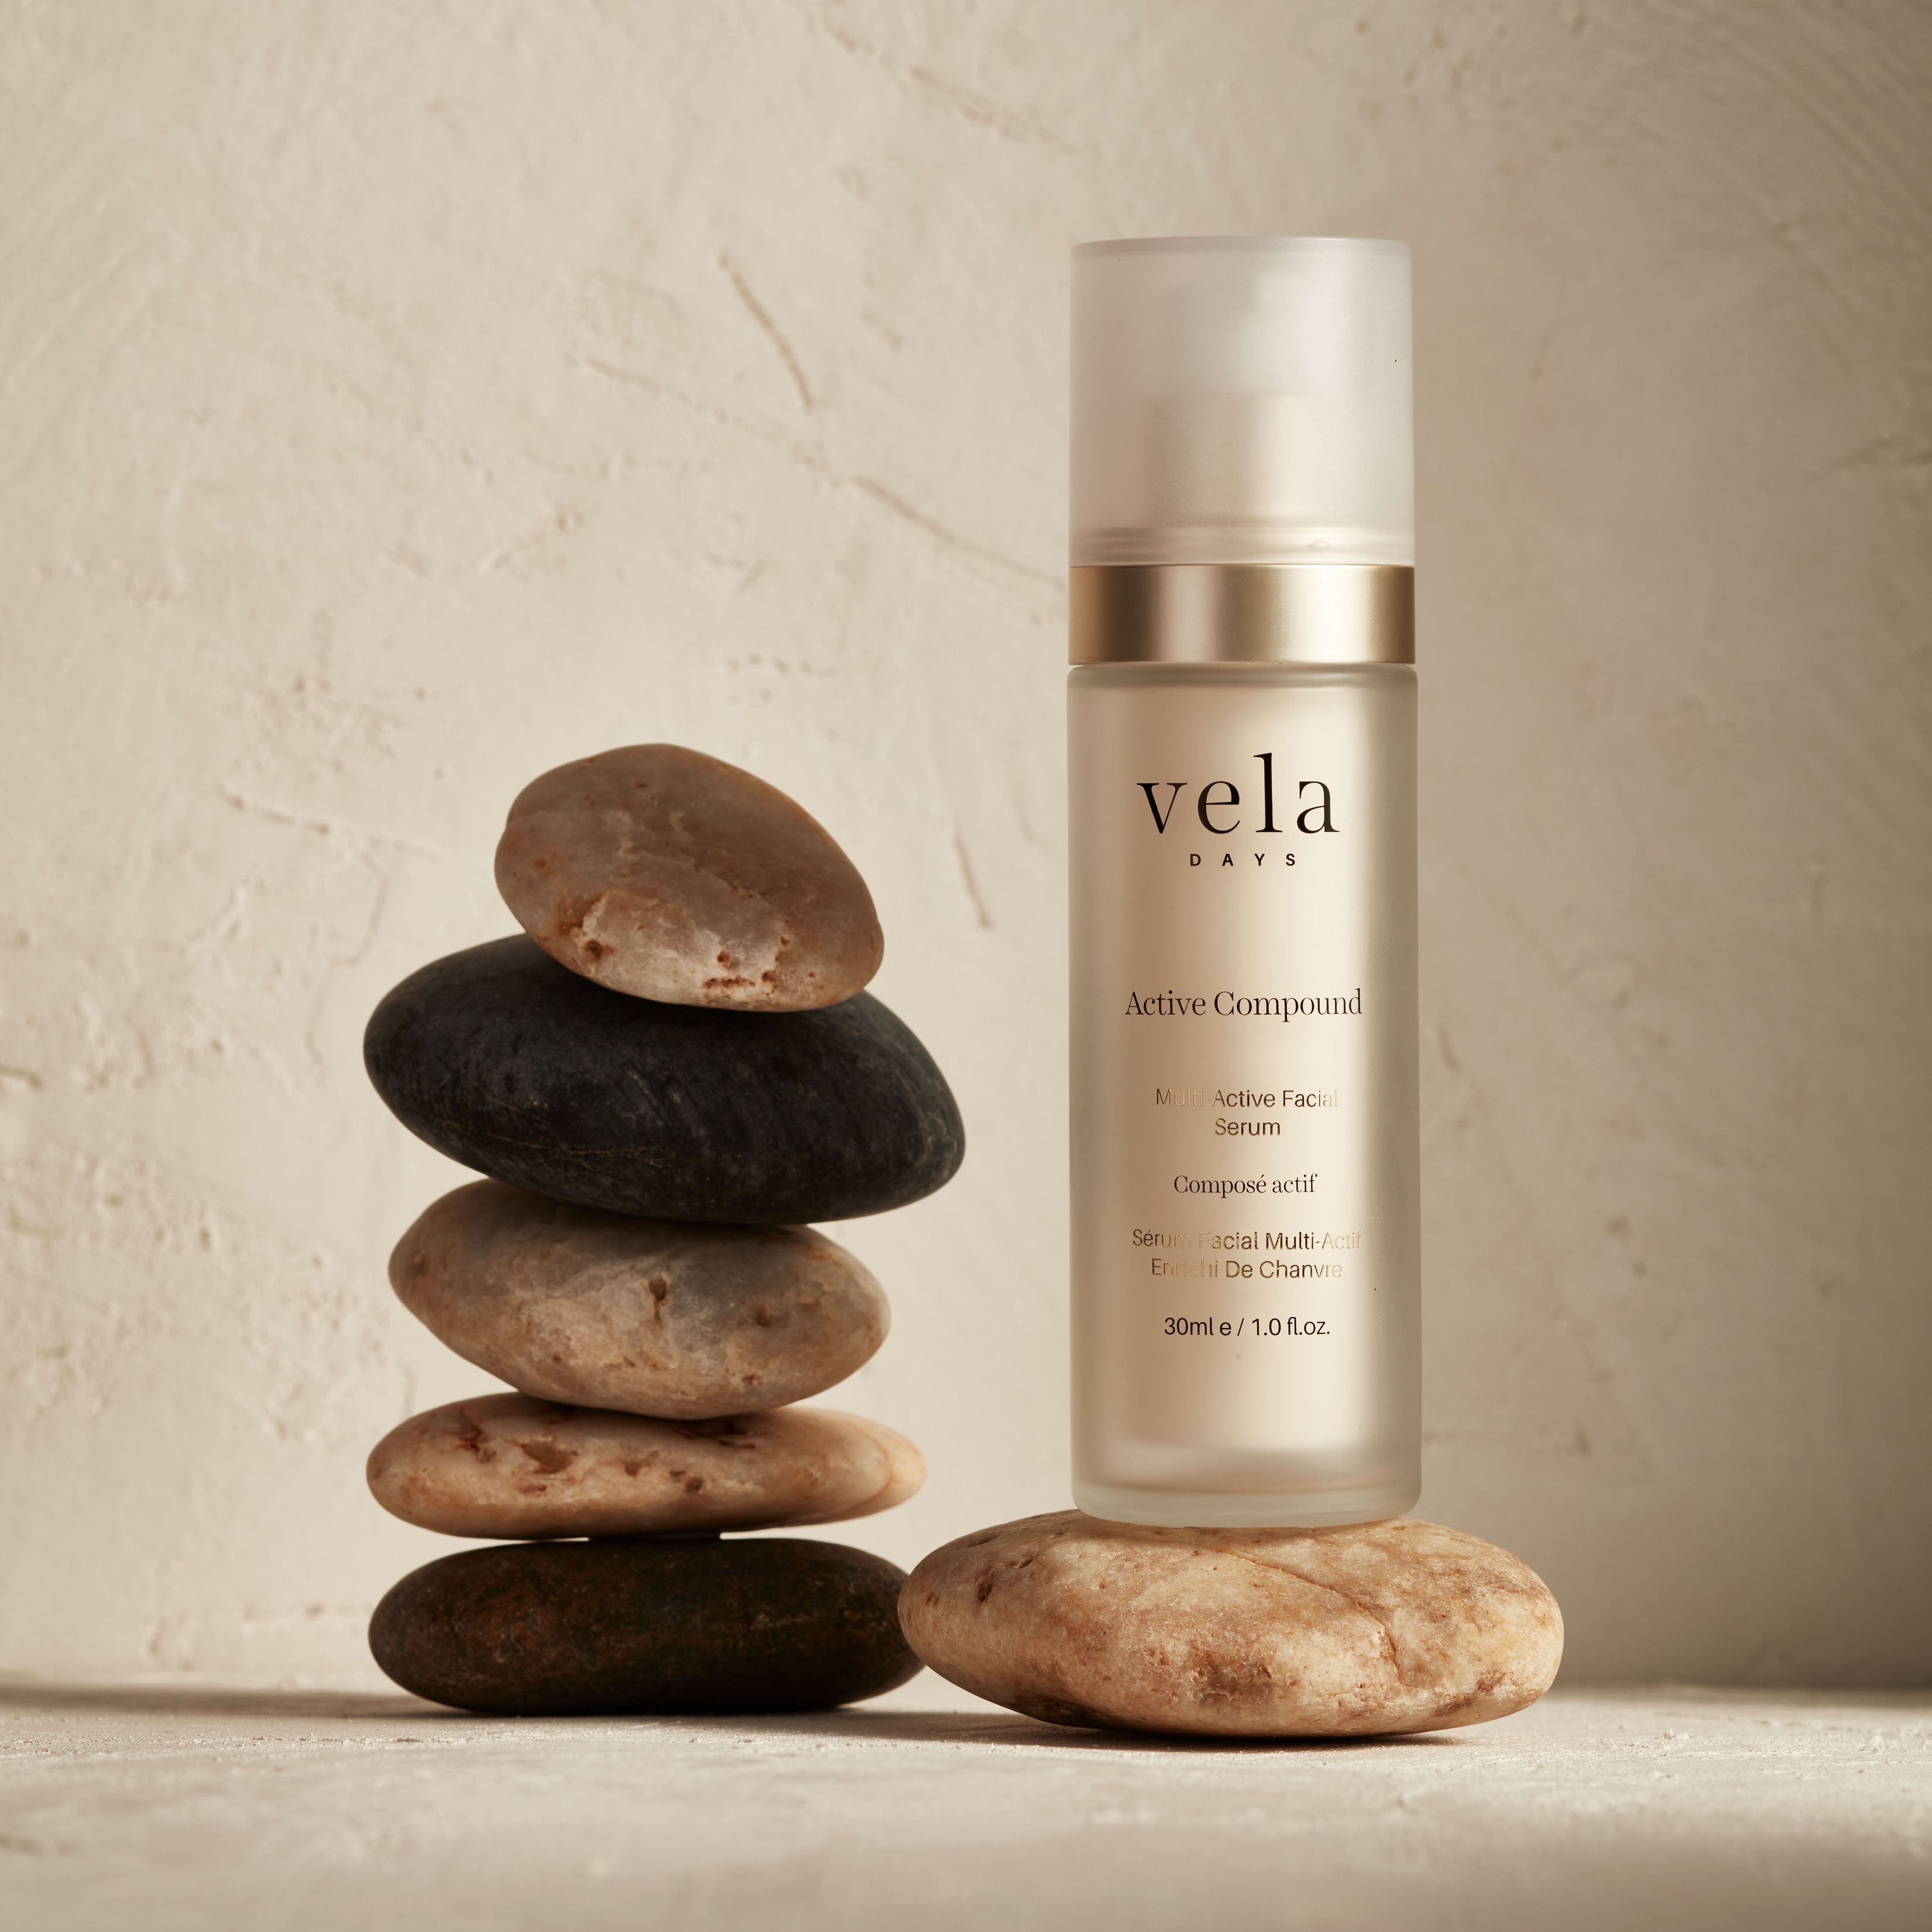 Vela days_Active Compound_antiageing product